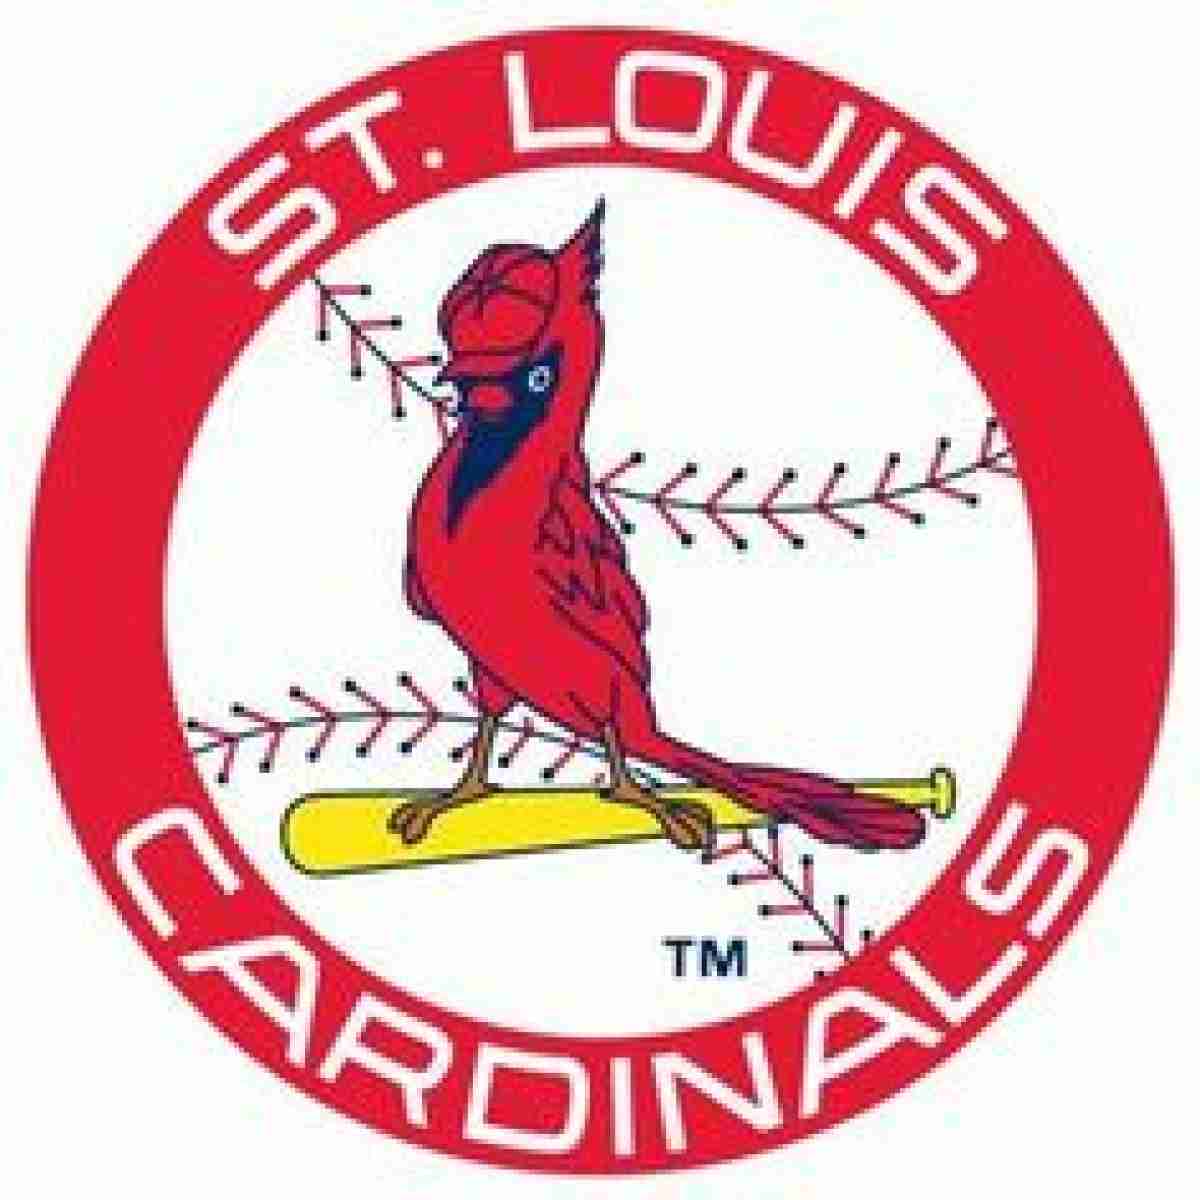 Not in Hall of Fame - The St. Louis Cardinals announce their Hall of Fame Class of 2018